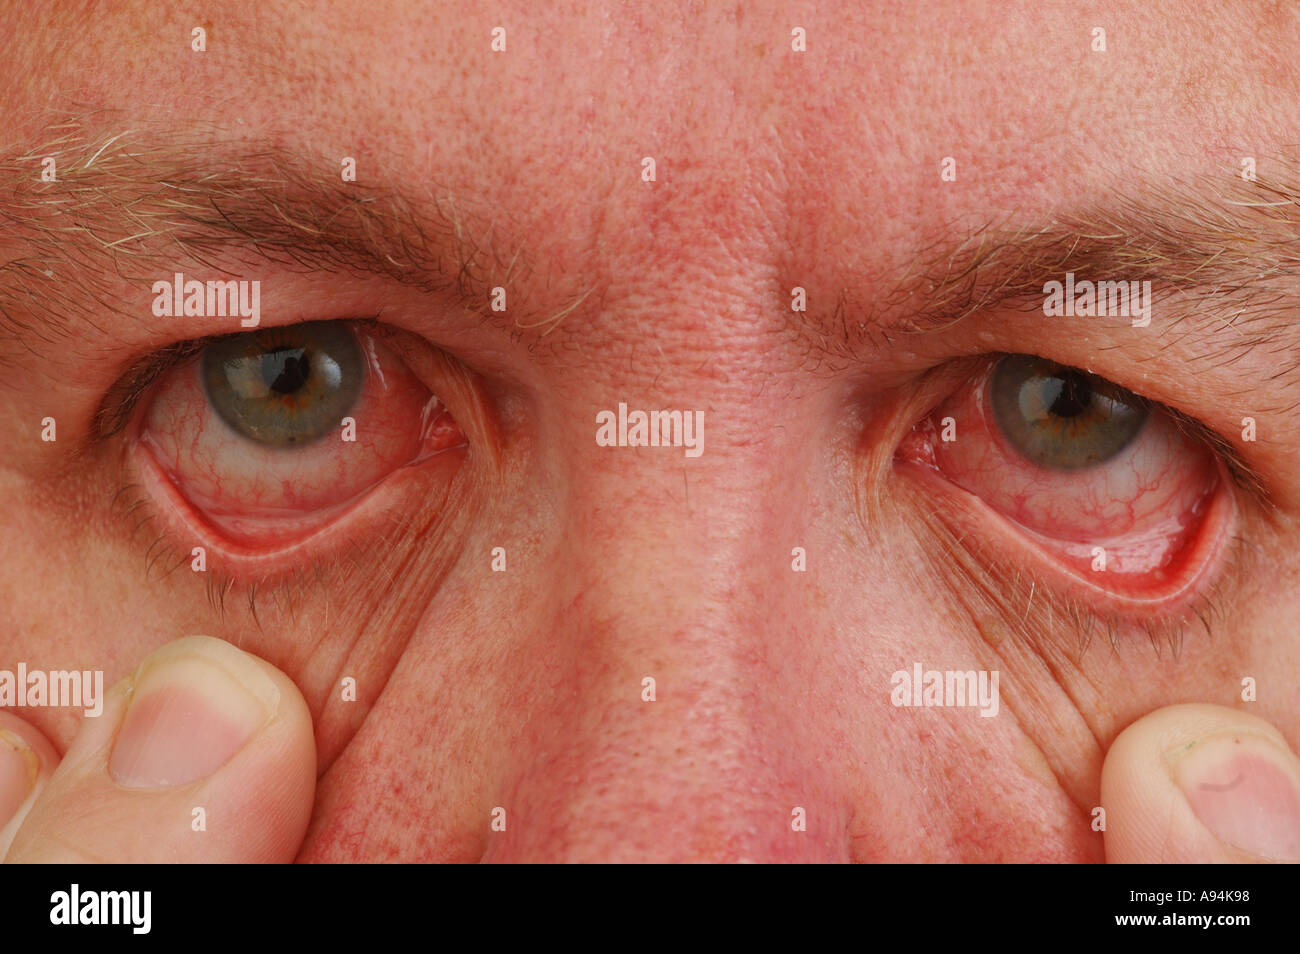 My bloodshot eyes after leaving contact lenses in for to long dsca 3260 Stock Photo